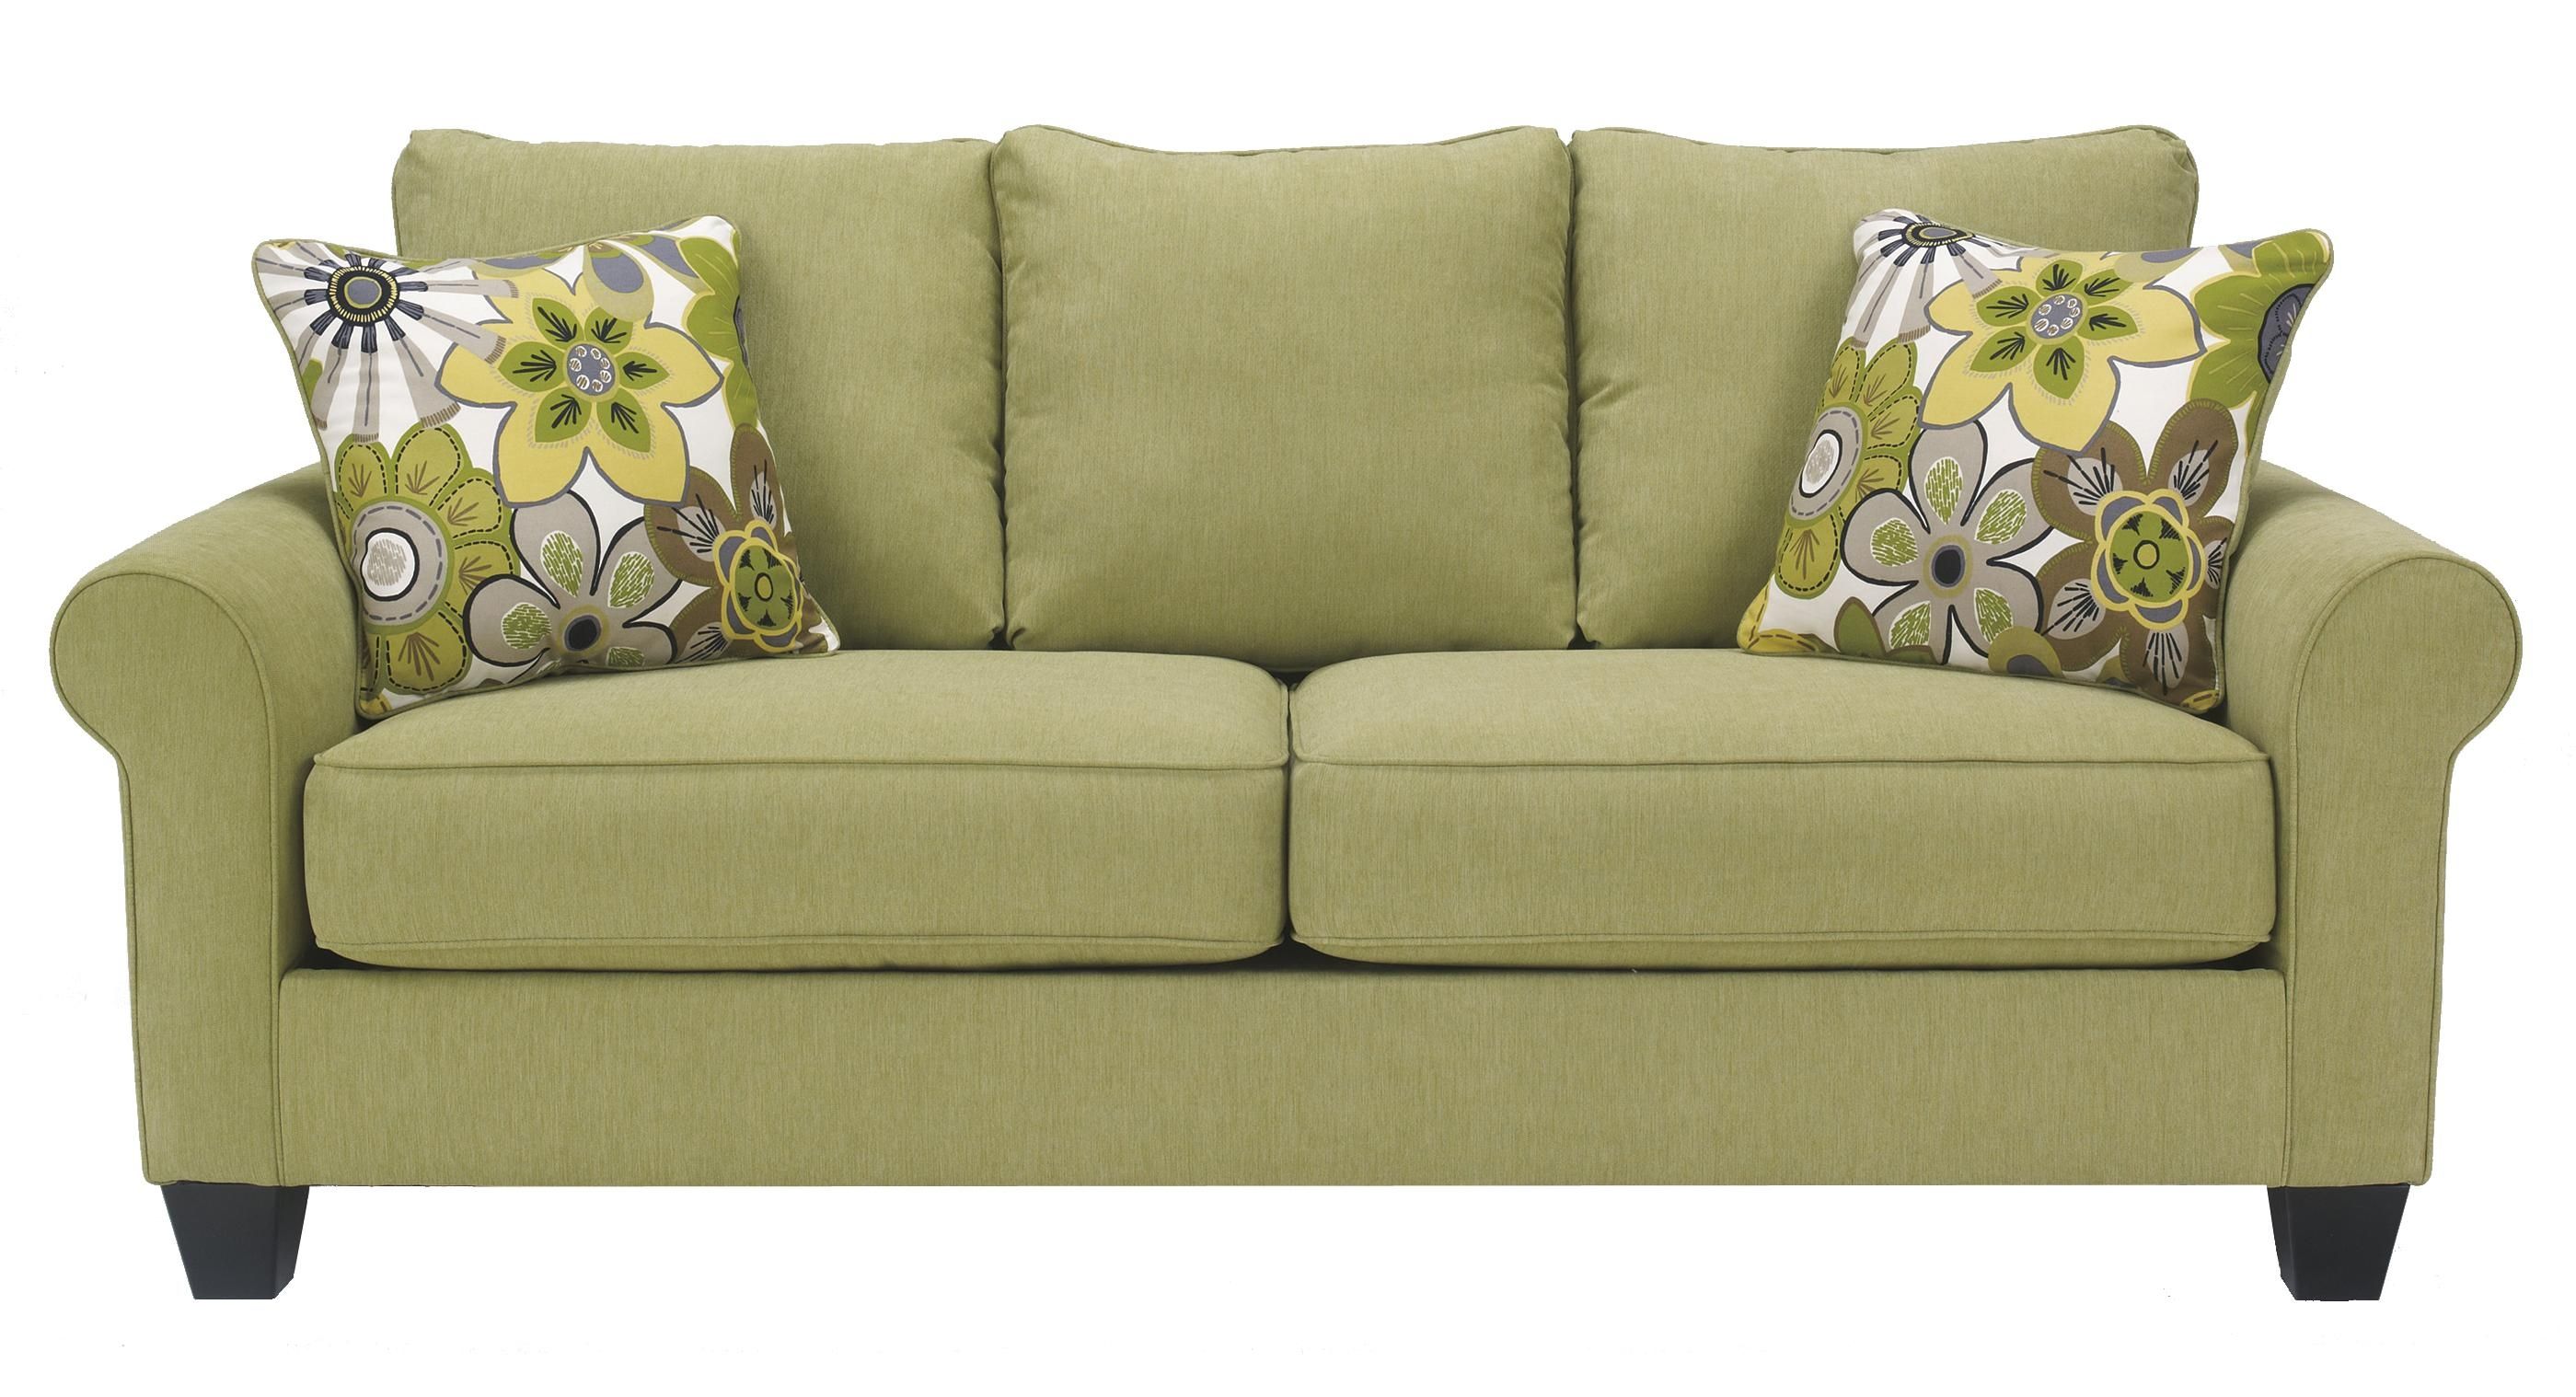 Decor Fascinating Benchcraft Sofa With Luxury Shapes For Living Within Berkline Sofa Recliner (Photo 11 of 15)